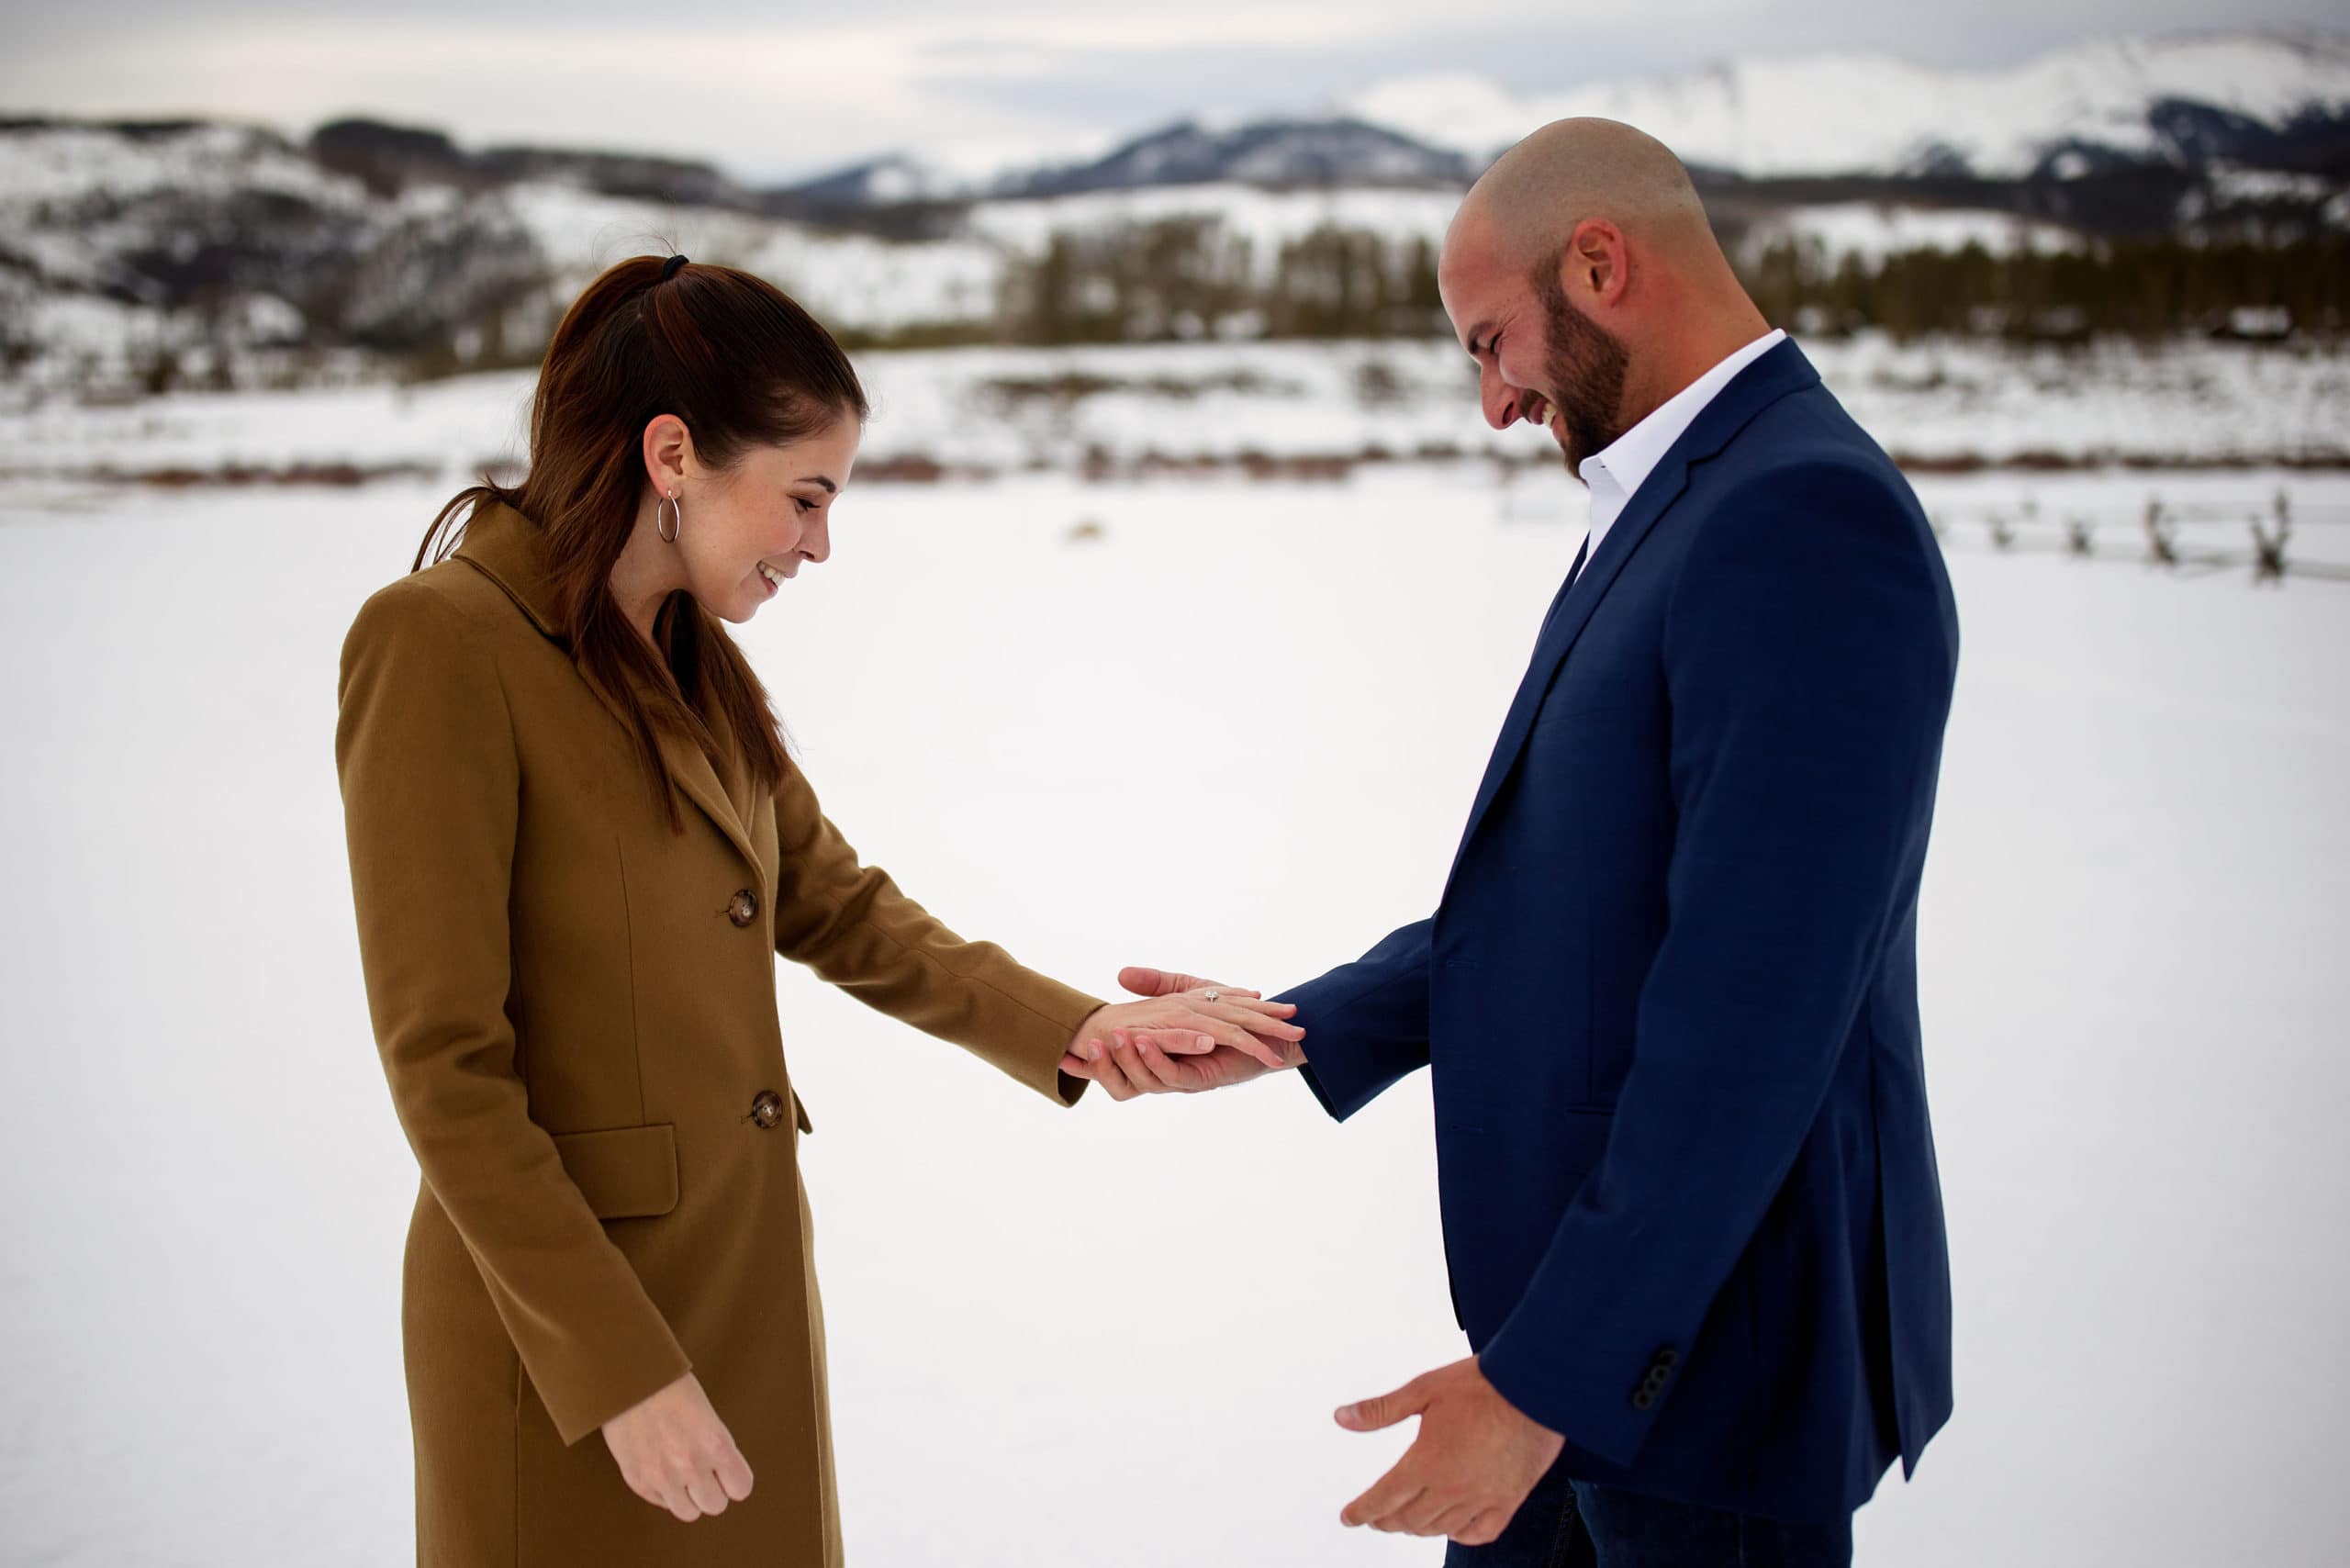 Sarah and Michael admire the engagement ring after their snowy proposal